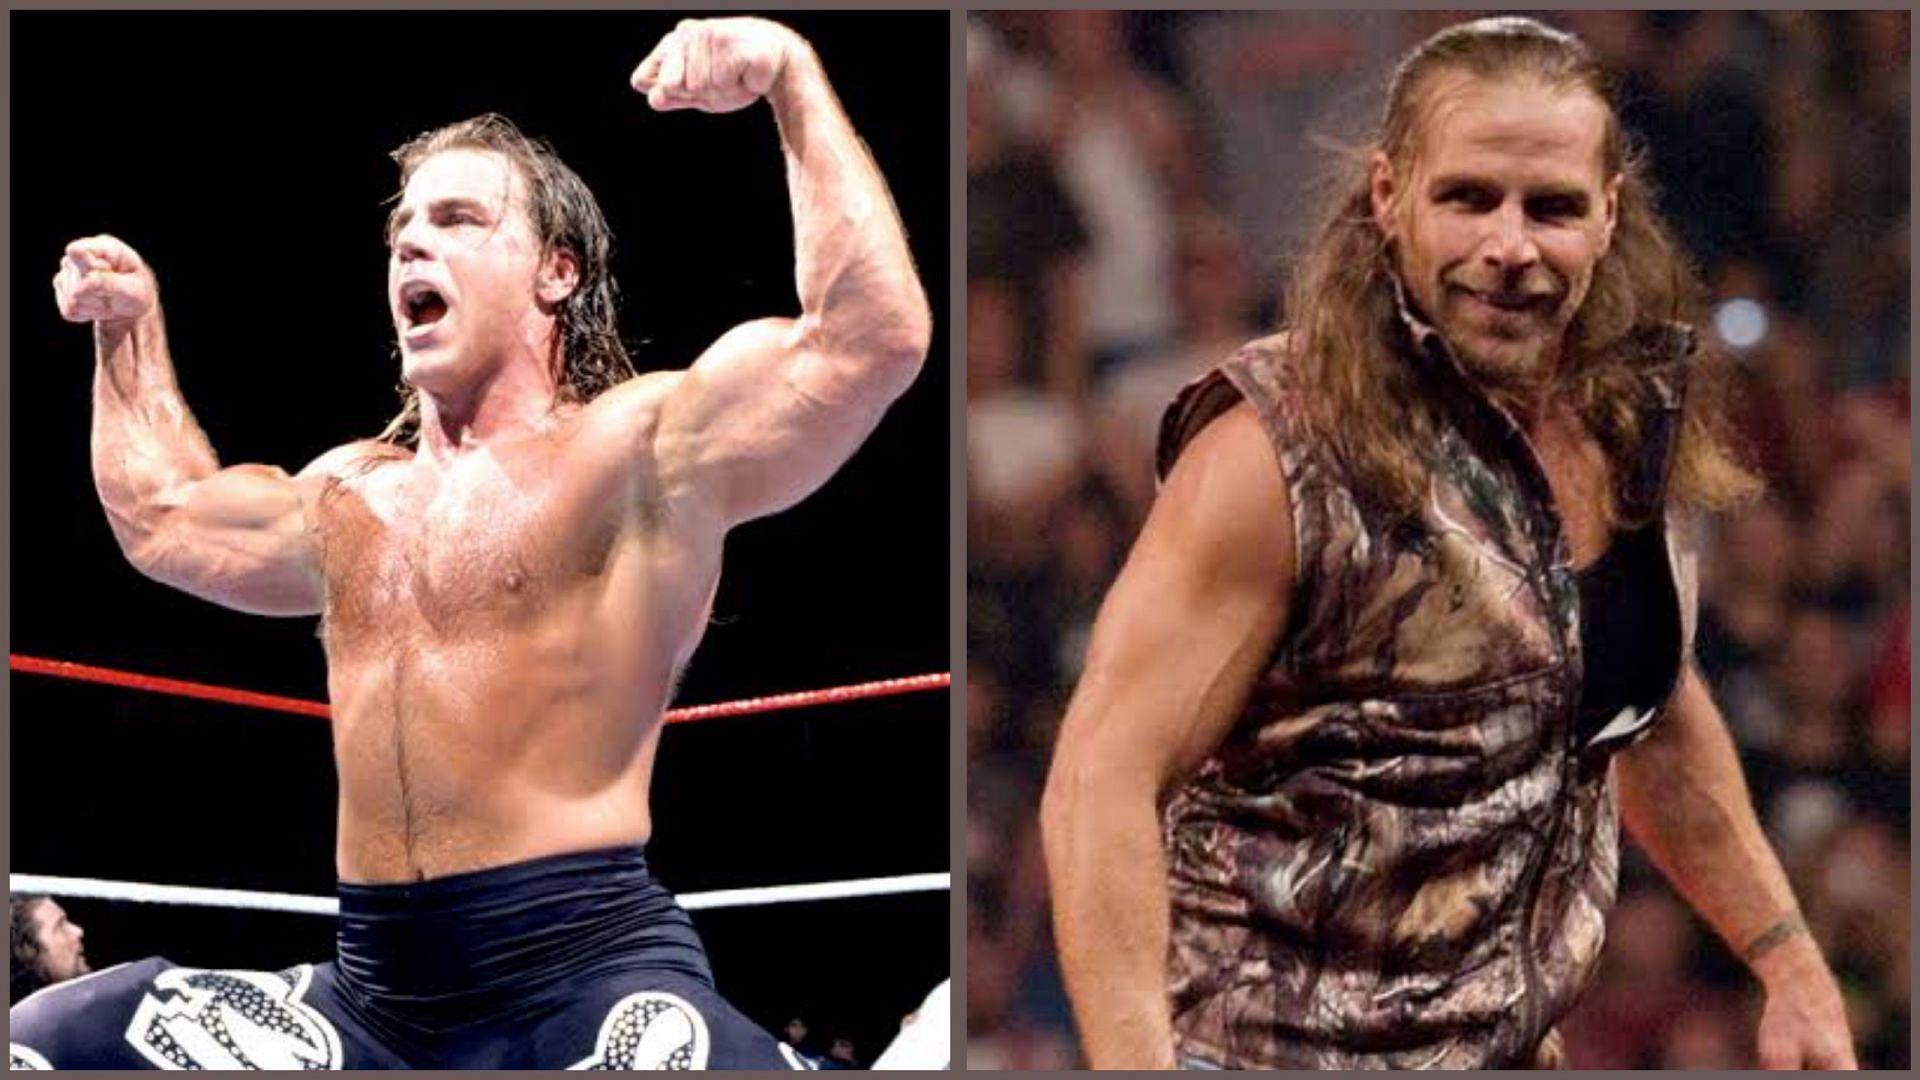 Shawn Michaels was spectacular in both 90s and 00s